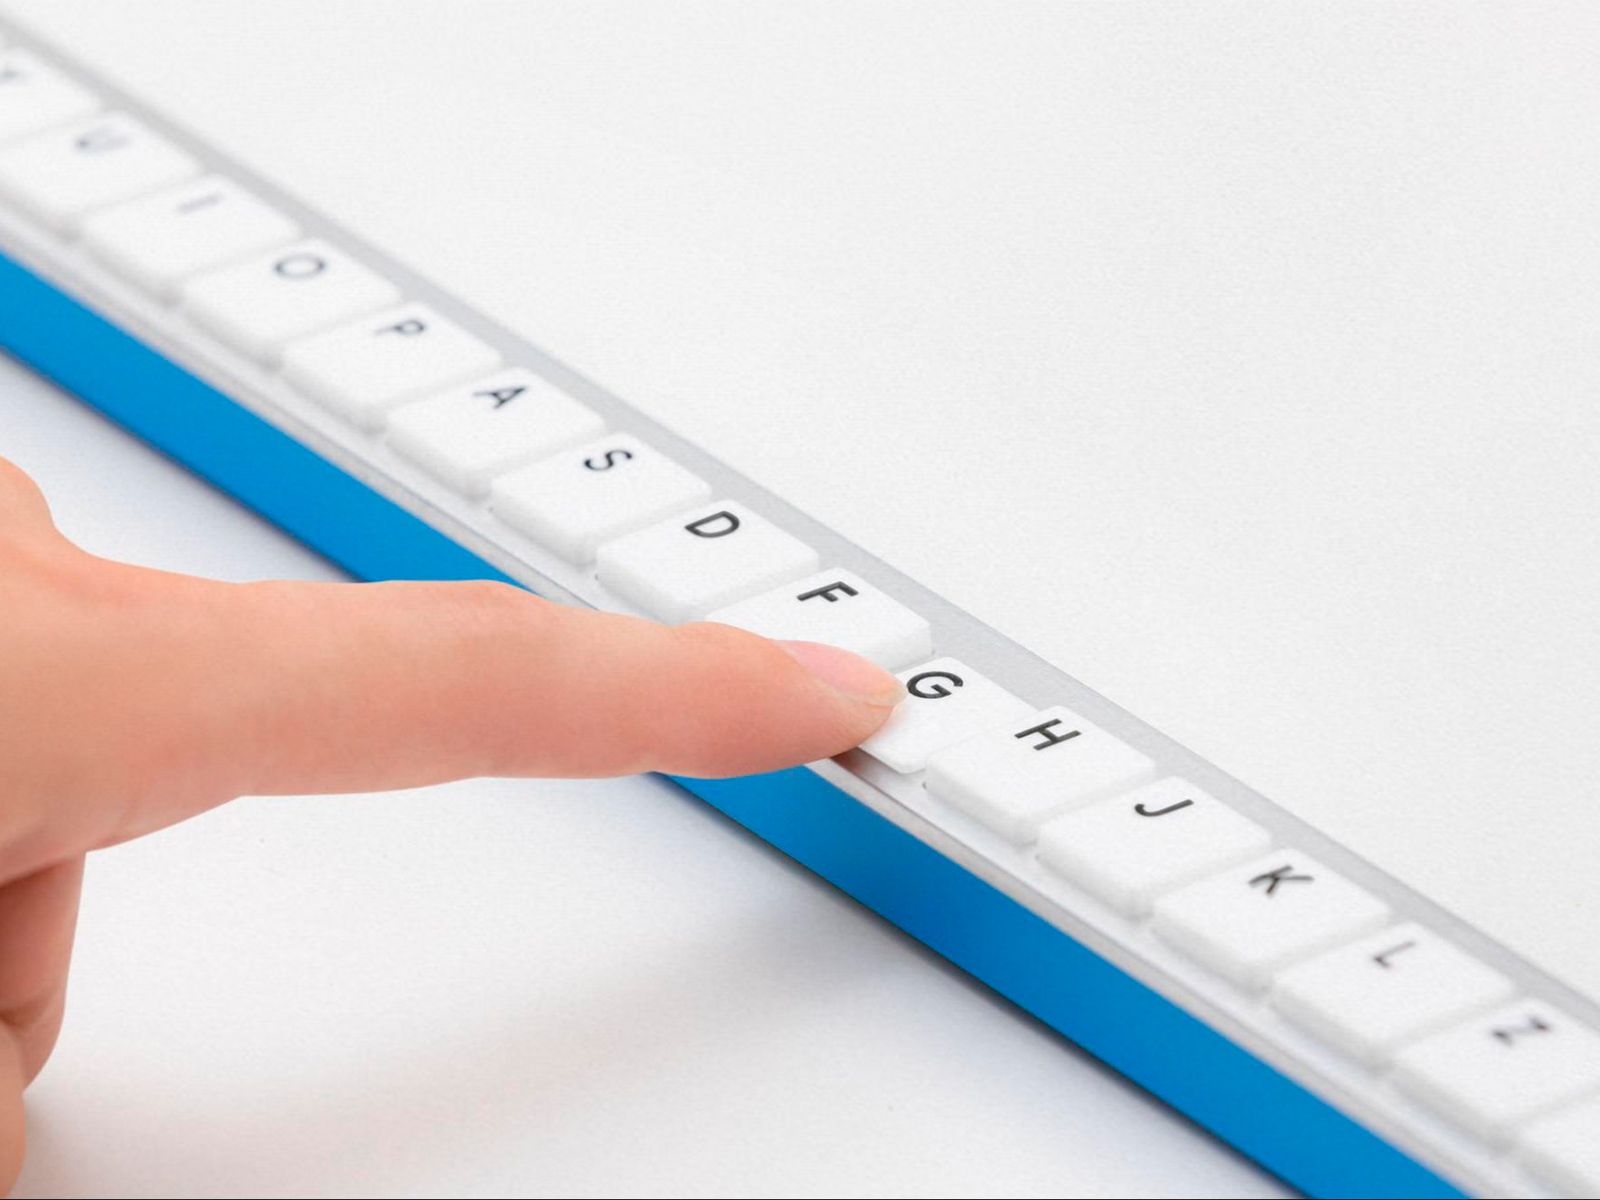 This is the G-Board, the 1.5-metre long keyboard designed by Google Japan